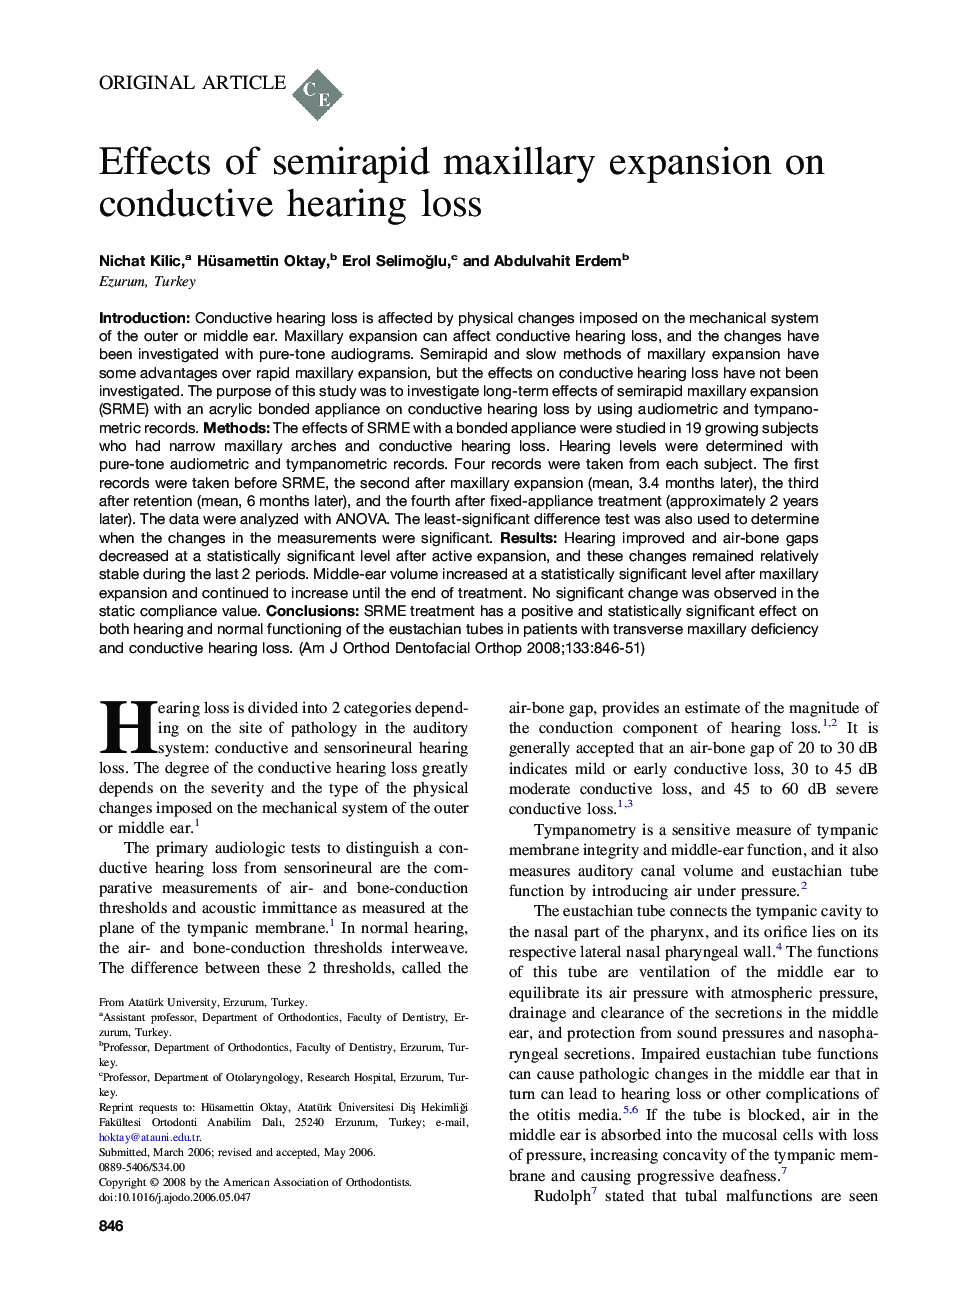 Effects of semirapid maxillary expansion on conductive hearing loss